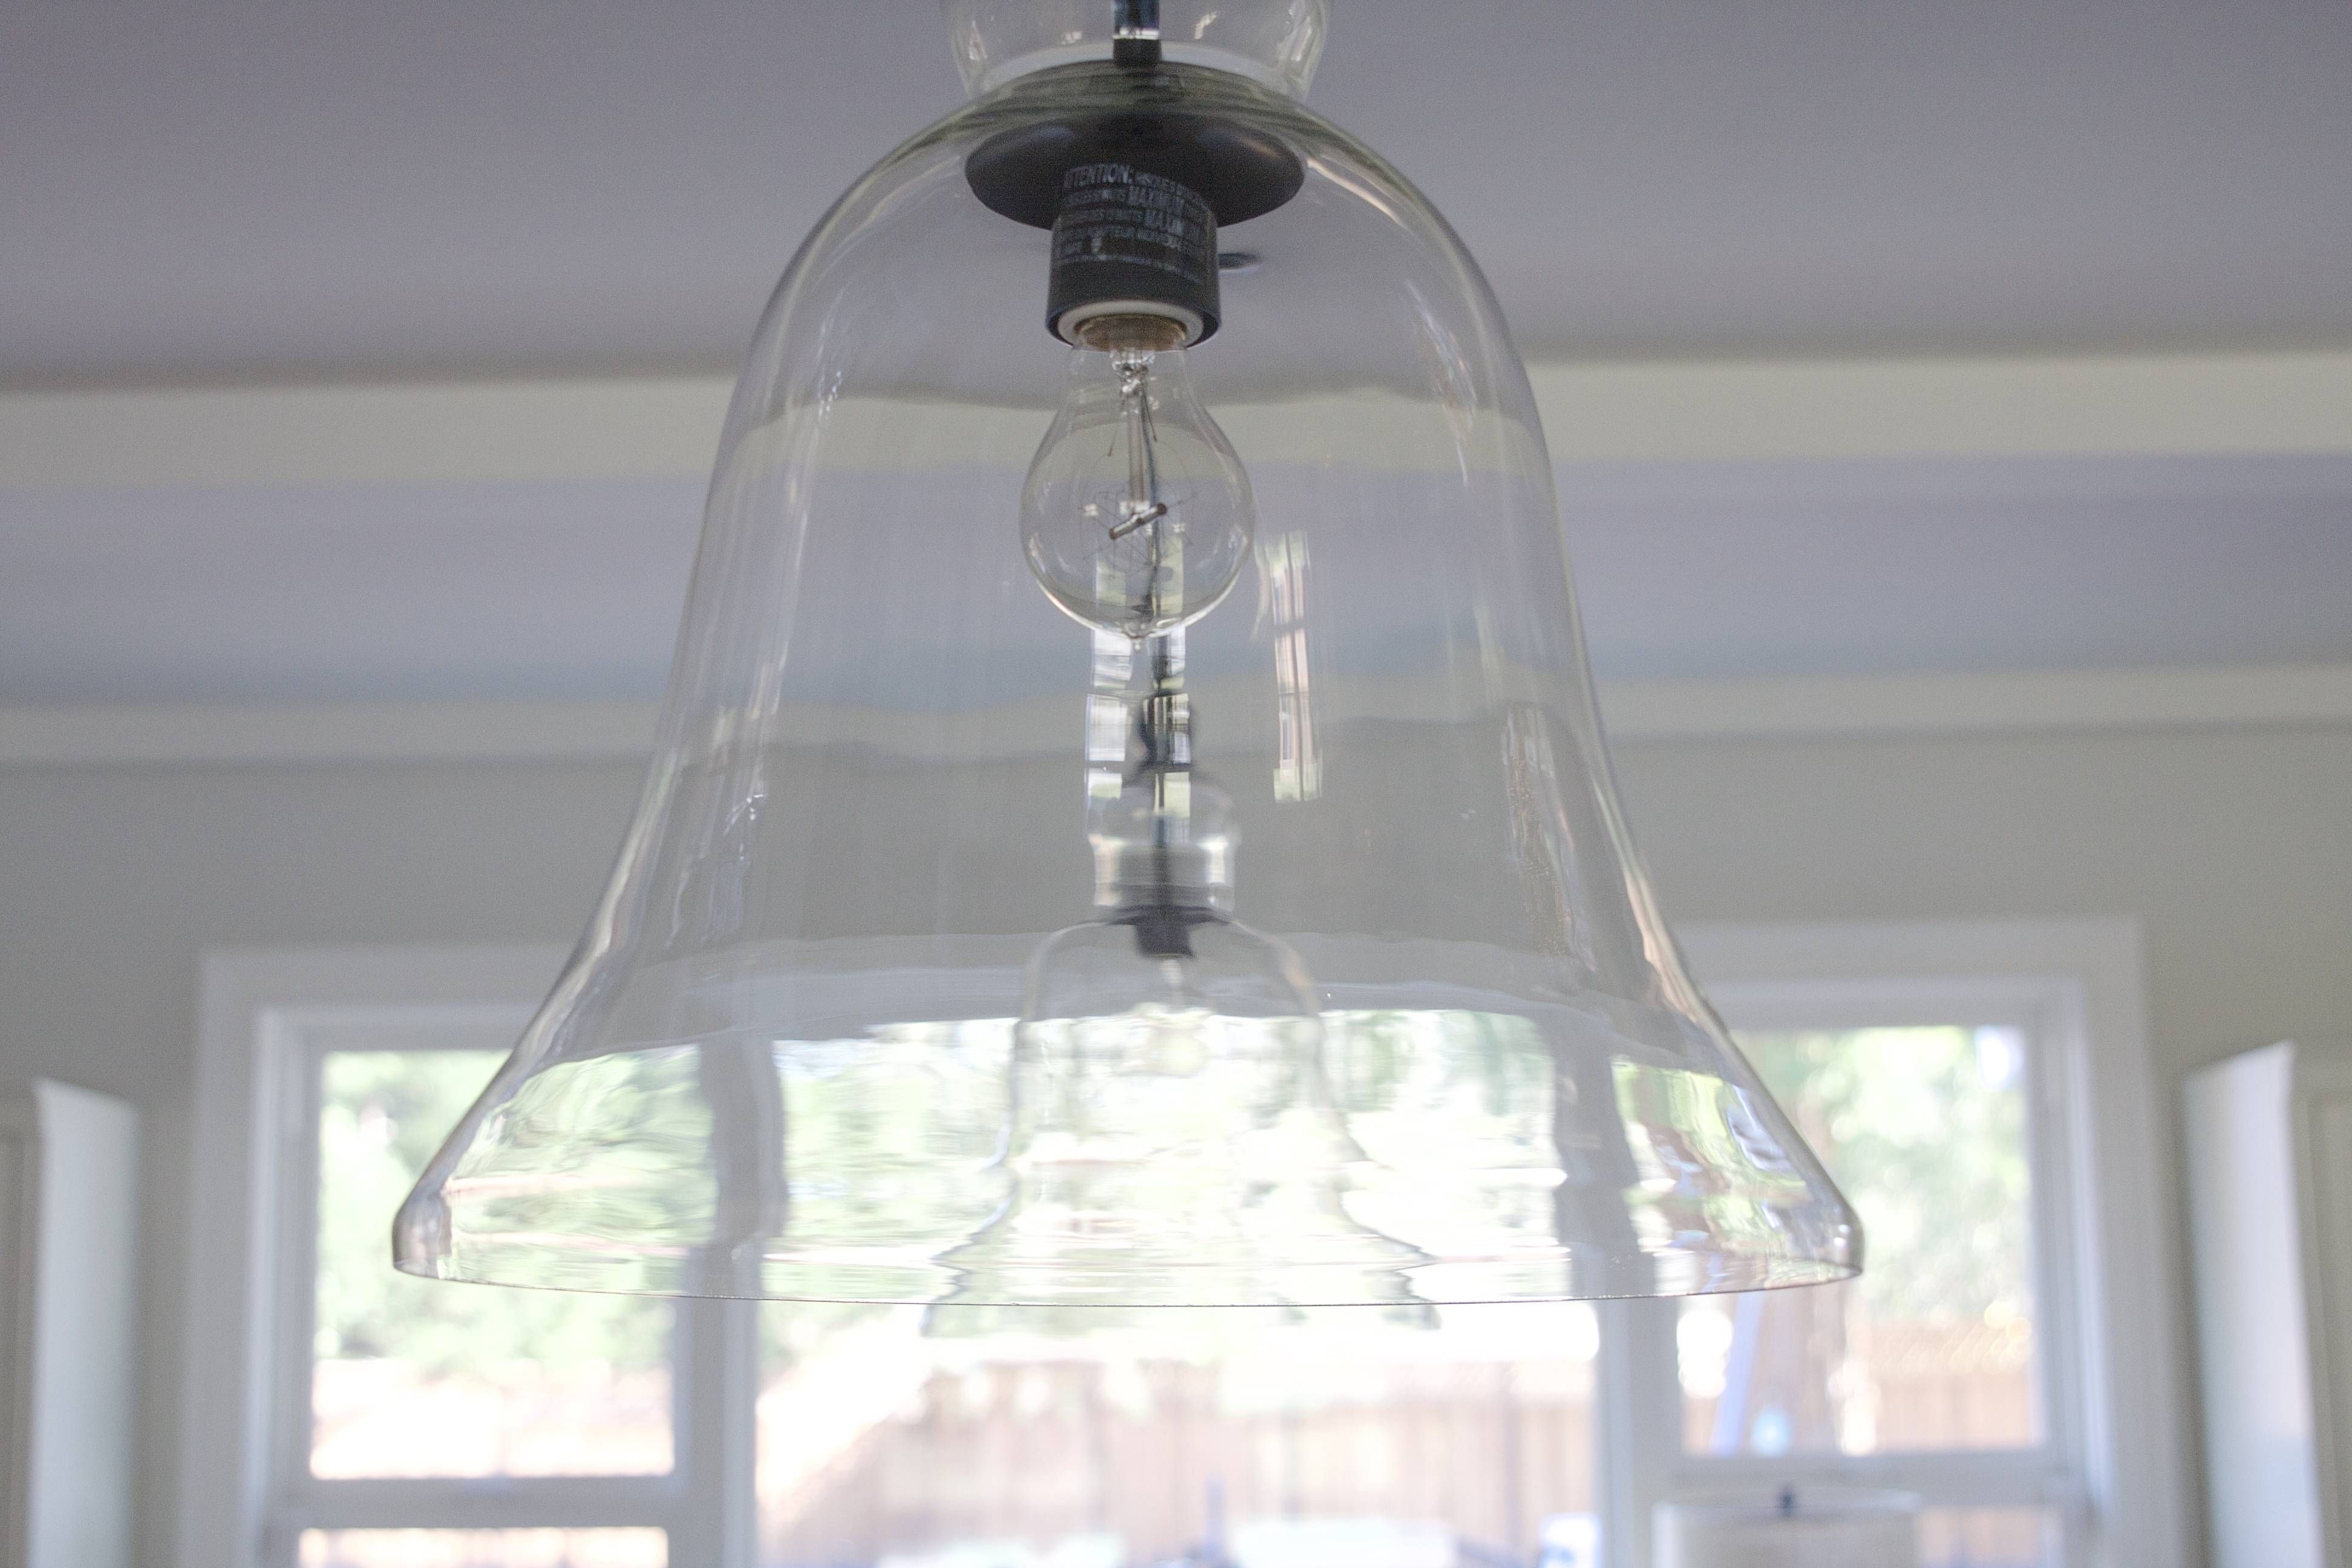 How To Clean Pottery Barn Rustic Pendant Lights – Simply Organized With Regard To Paxton Glass Pendants (View 13 of 15)